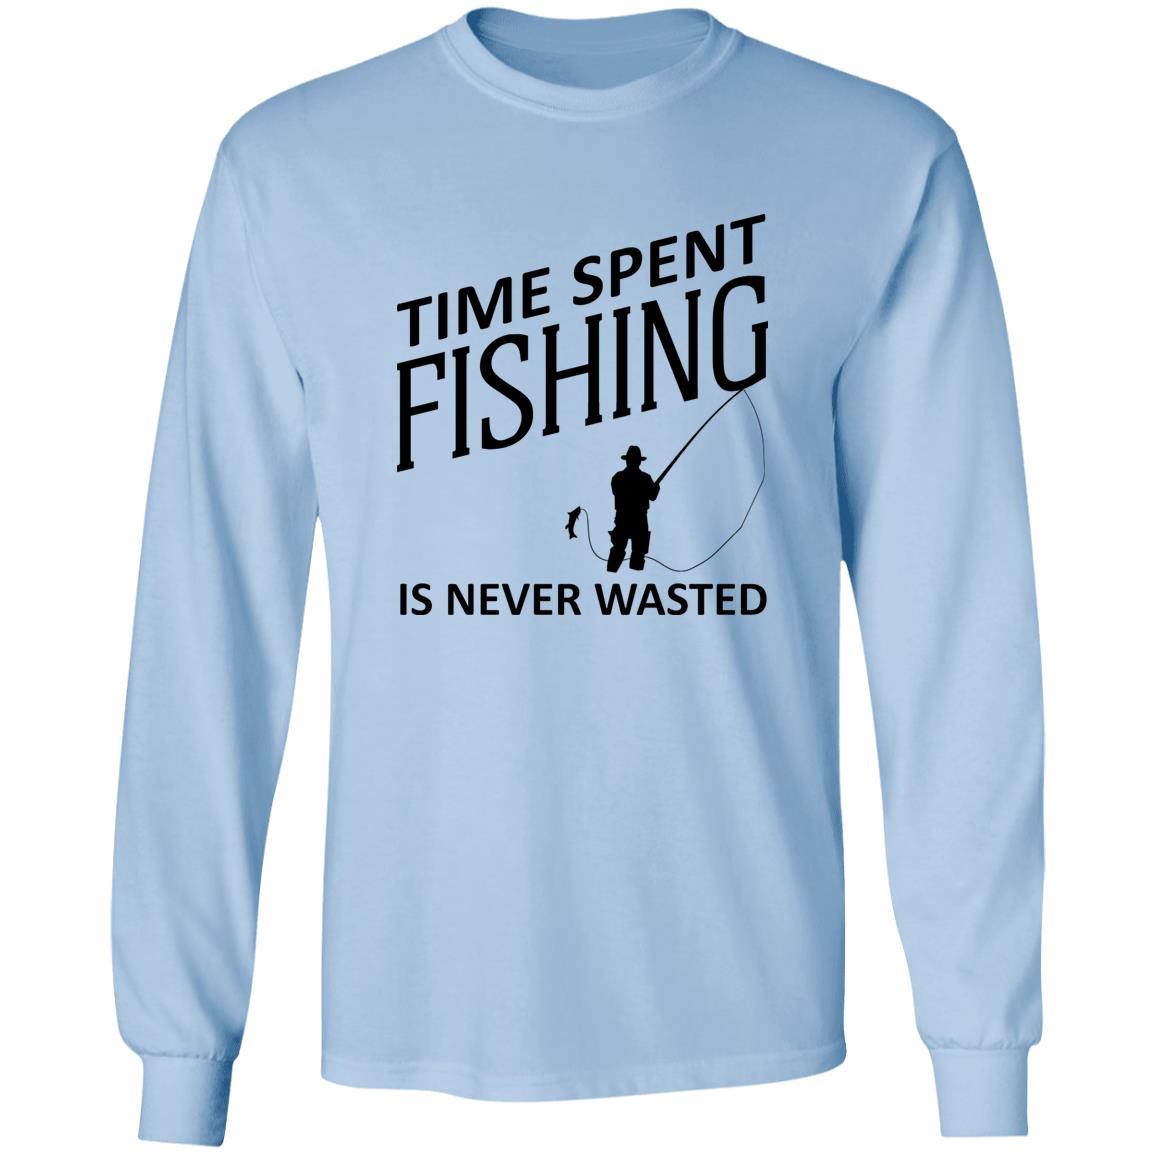 Time Spent Fishing is never wasted Long Sleeve T-Shirt b light-blue